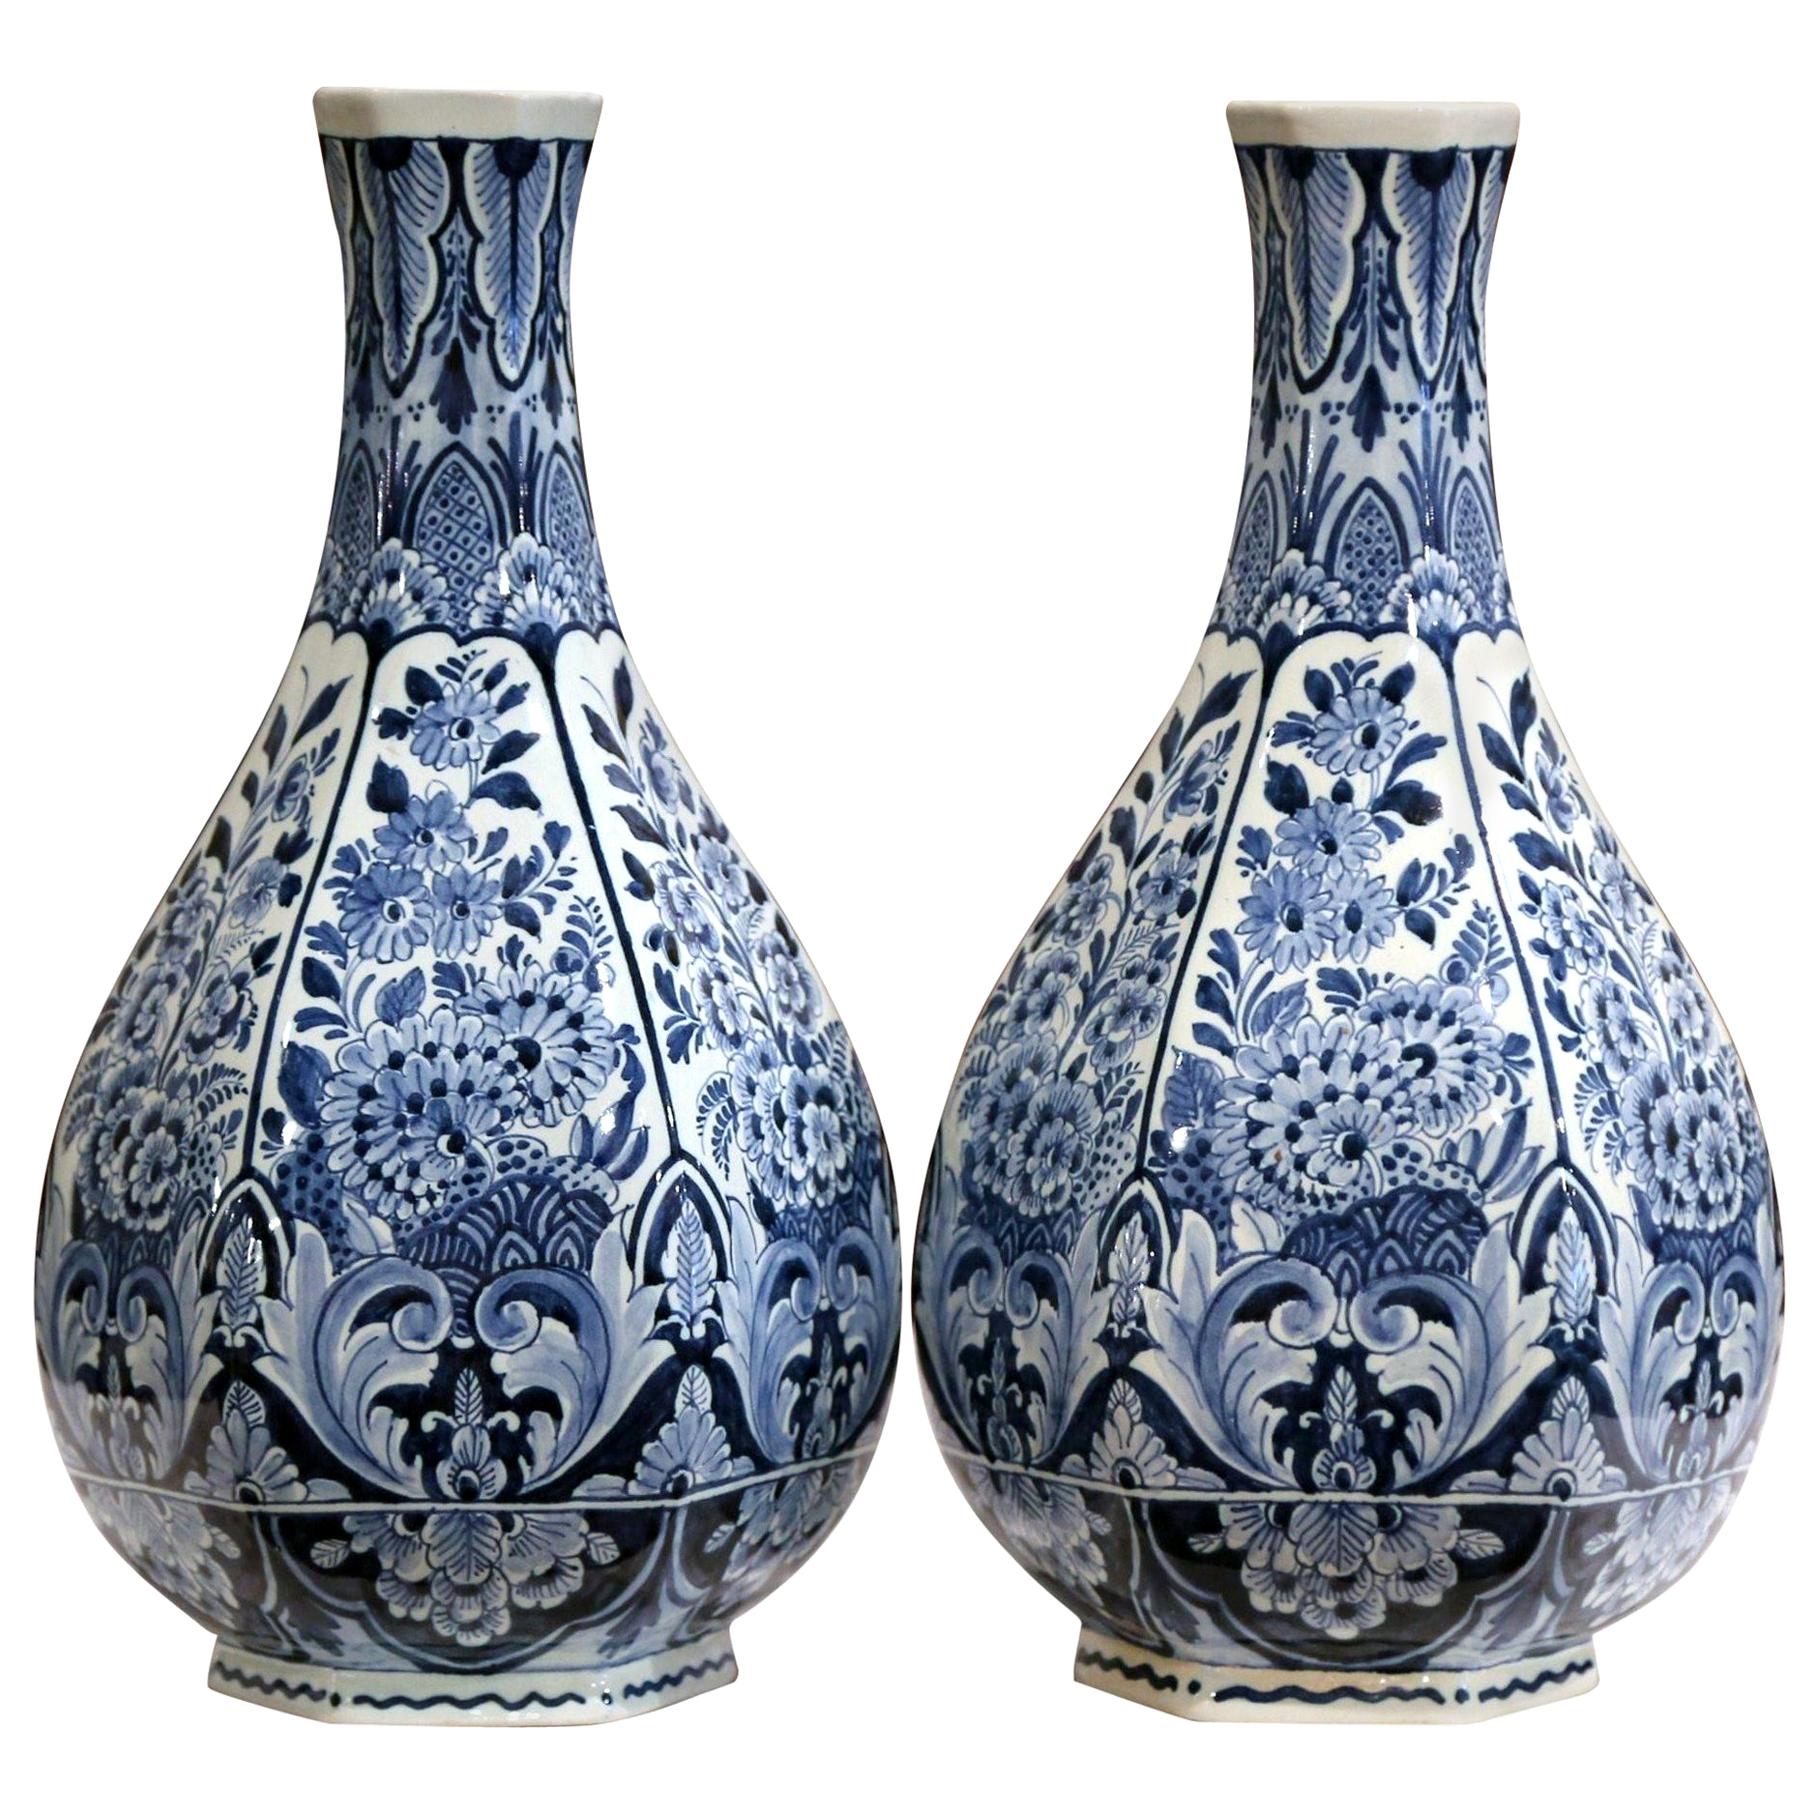 Pair of Mid-20th Century Faience Blue and White Hand Painted Delft OUD Vases